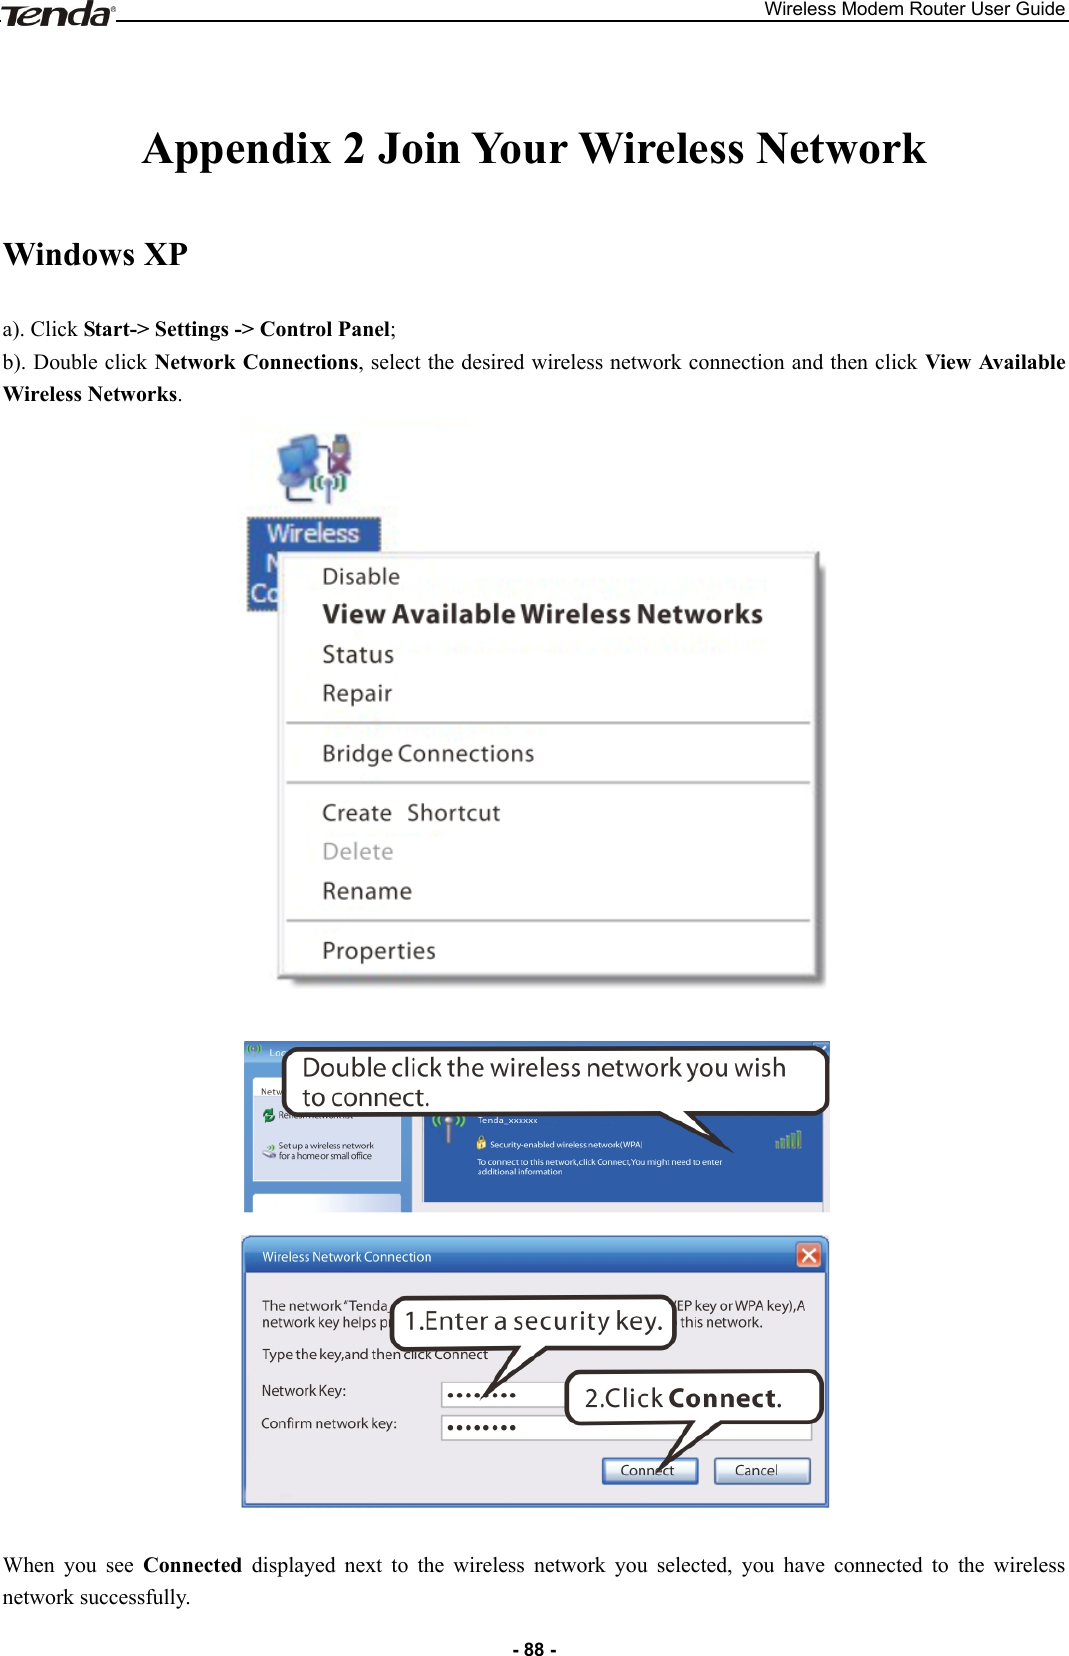 Wireless Modem Router User Guide - 88 -  Appendix 2 Join Your Wireless Network Windows XP a). Click Start-&gt; Settings -&gt; Control Panel; b). Double click Network Connections, select the desired wireless network connection and then click View Available Wireless Networks.     When  you  see  Connected  displayed  next  to  the  wireless  network  you  selected,  you  have  connected  to  the  wireless network successfully. 